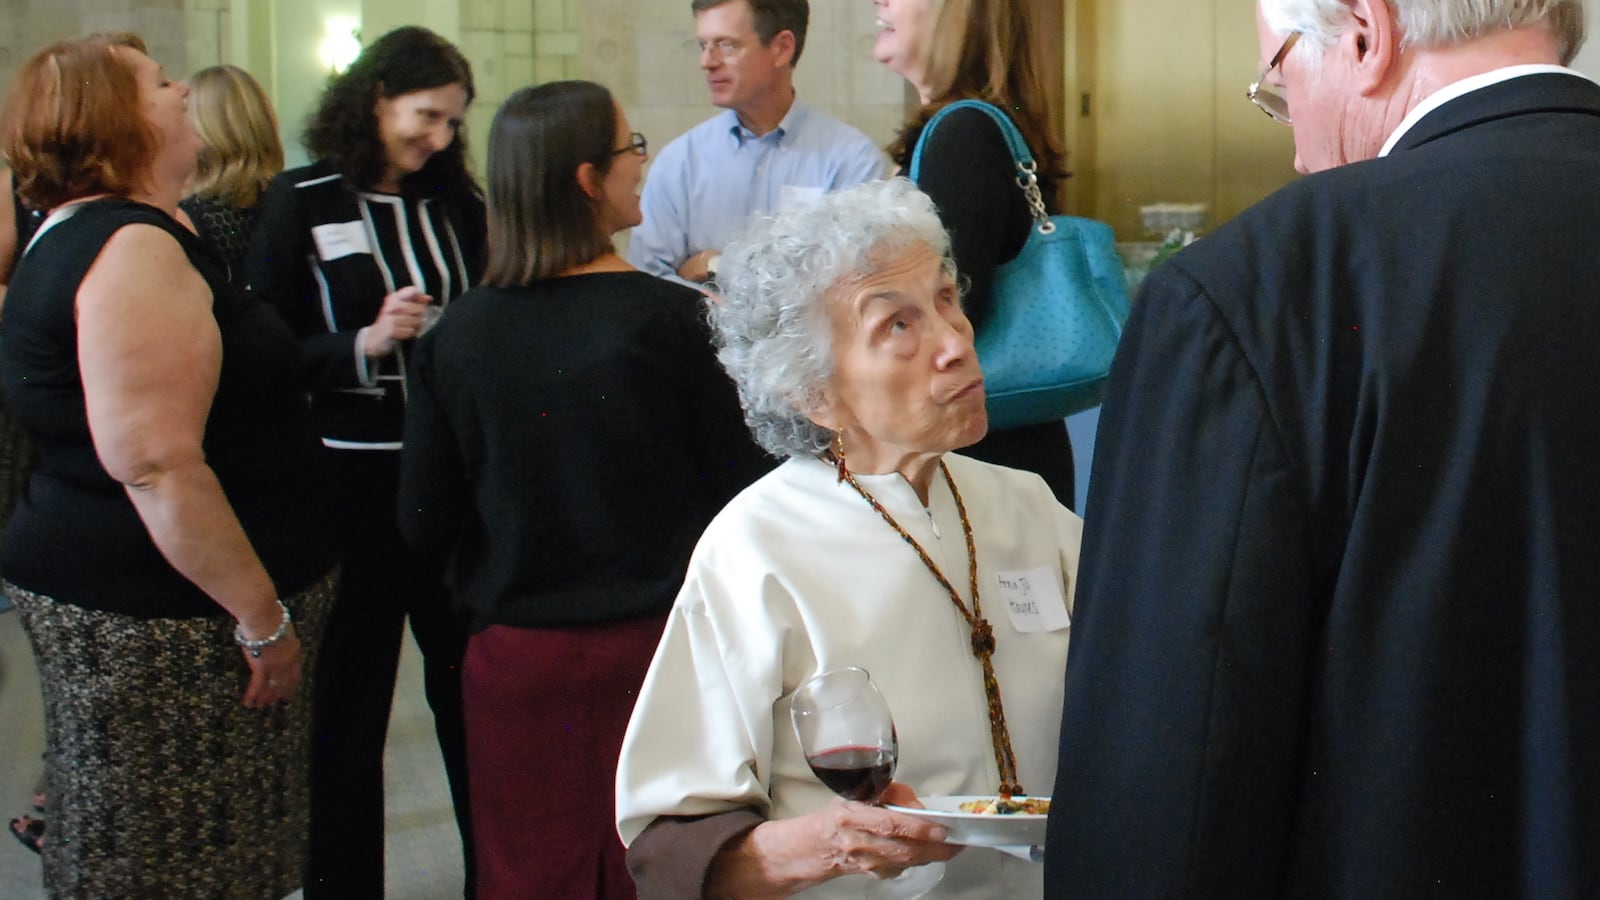 Anna Jo Haynes, co-chair of the Early Childhood Leadership Commission, chats with a guest at an event celebrating the release of the new Early Childhood Colorado Framework on Wednesday.